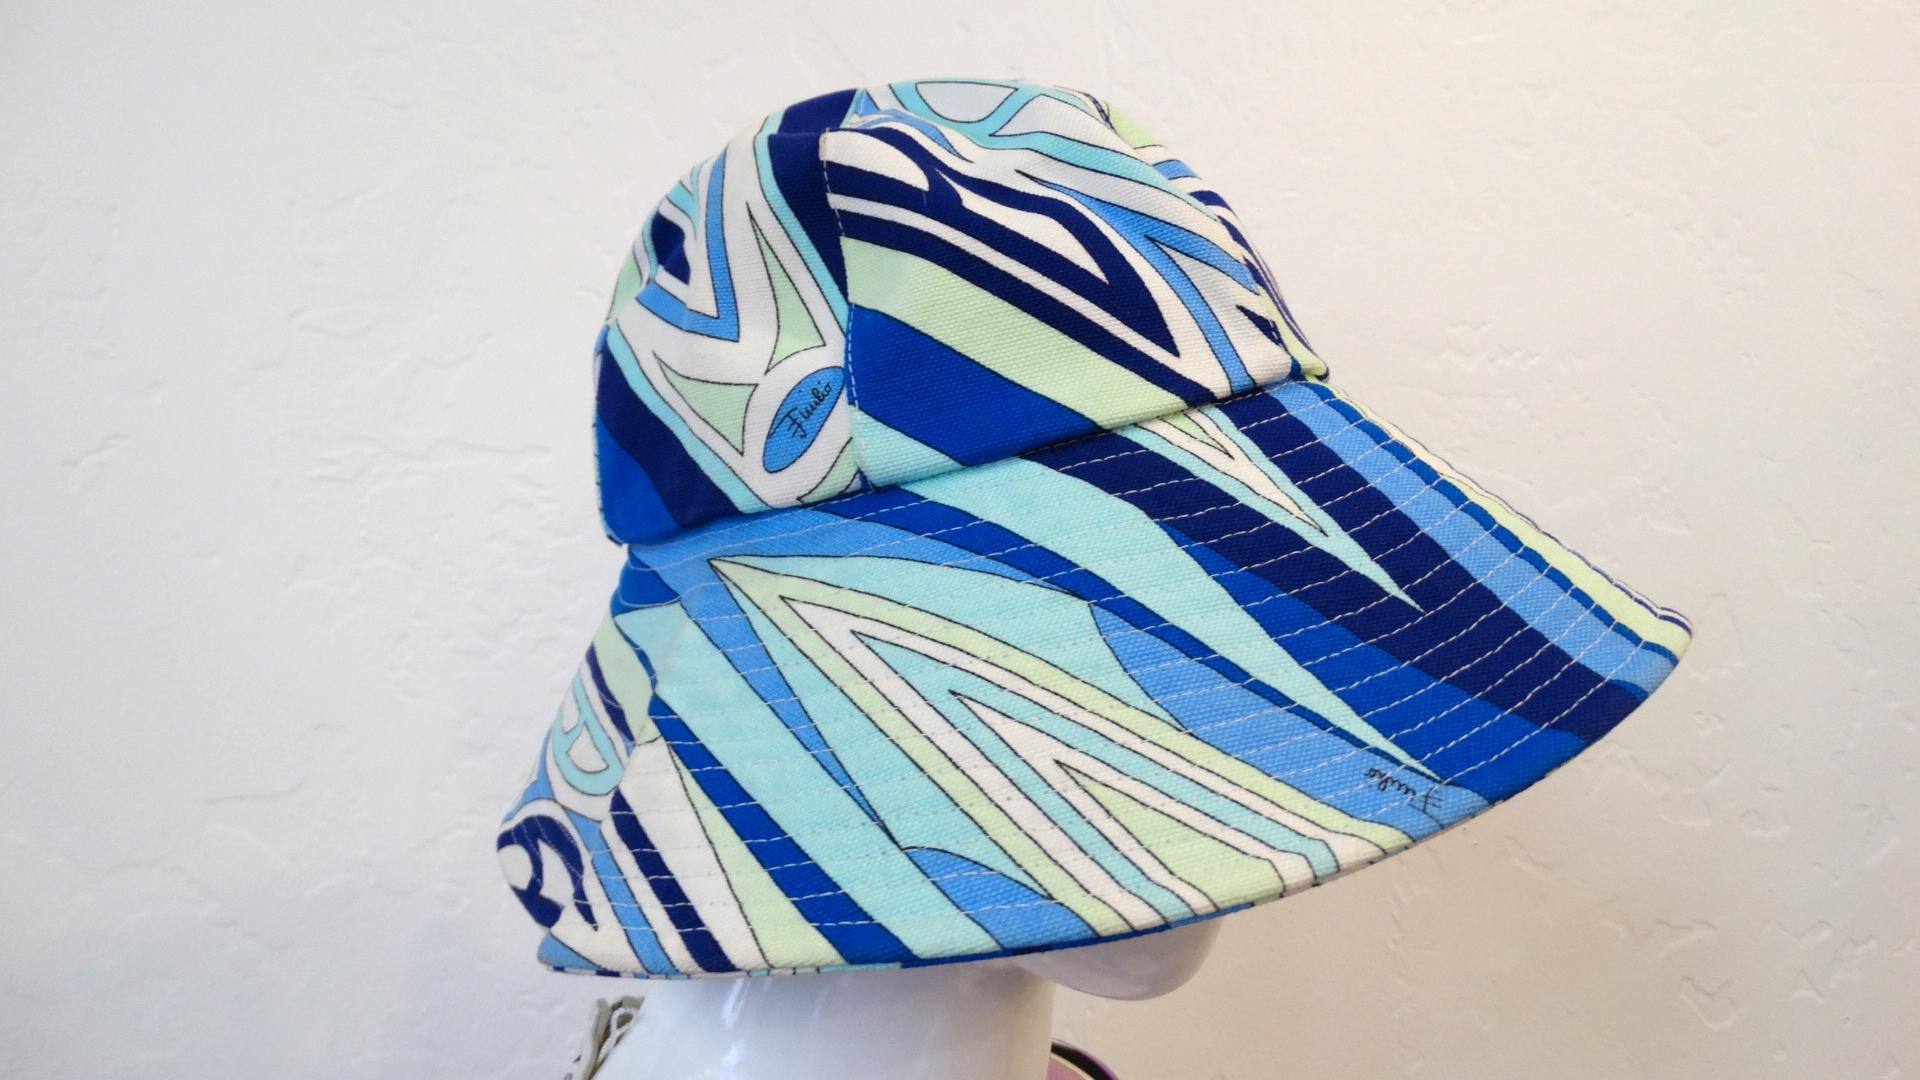 Embrace All The Sunny Weather With This Bucket Hat! Circa late 90s/early 2000s, this Pucci bucket hat features a beautiful abstract motif made up of blues, greens and white. Perfect for a day by the pool, your next vacation or just throw on for your